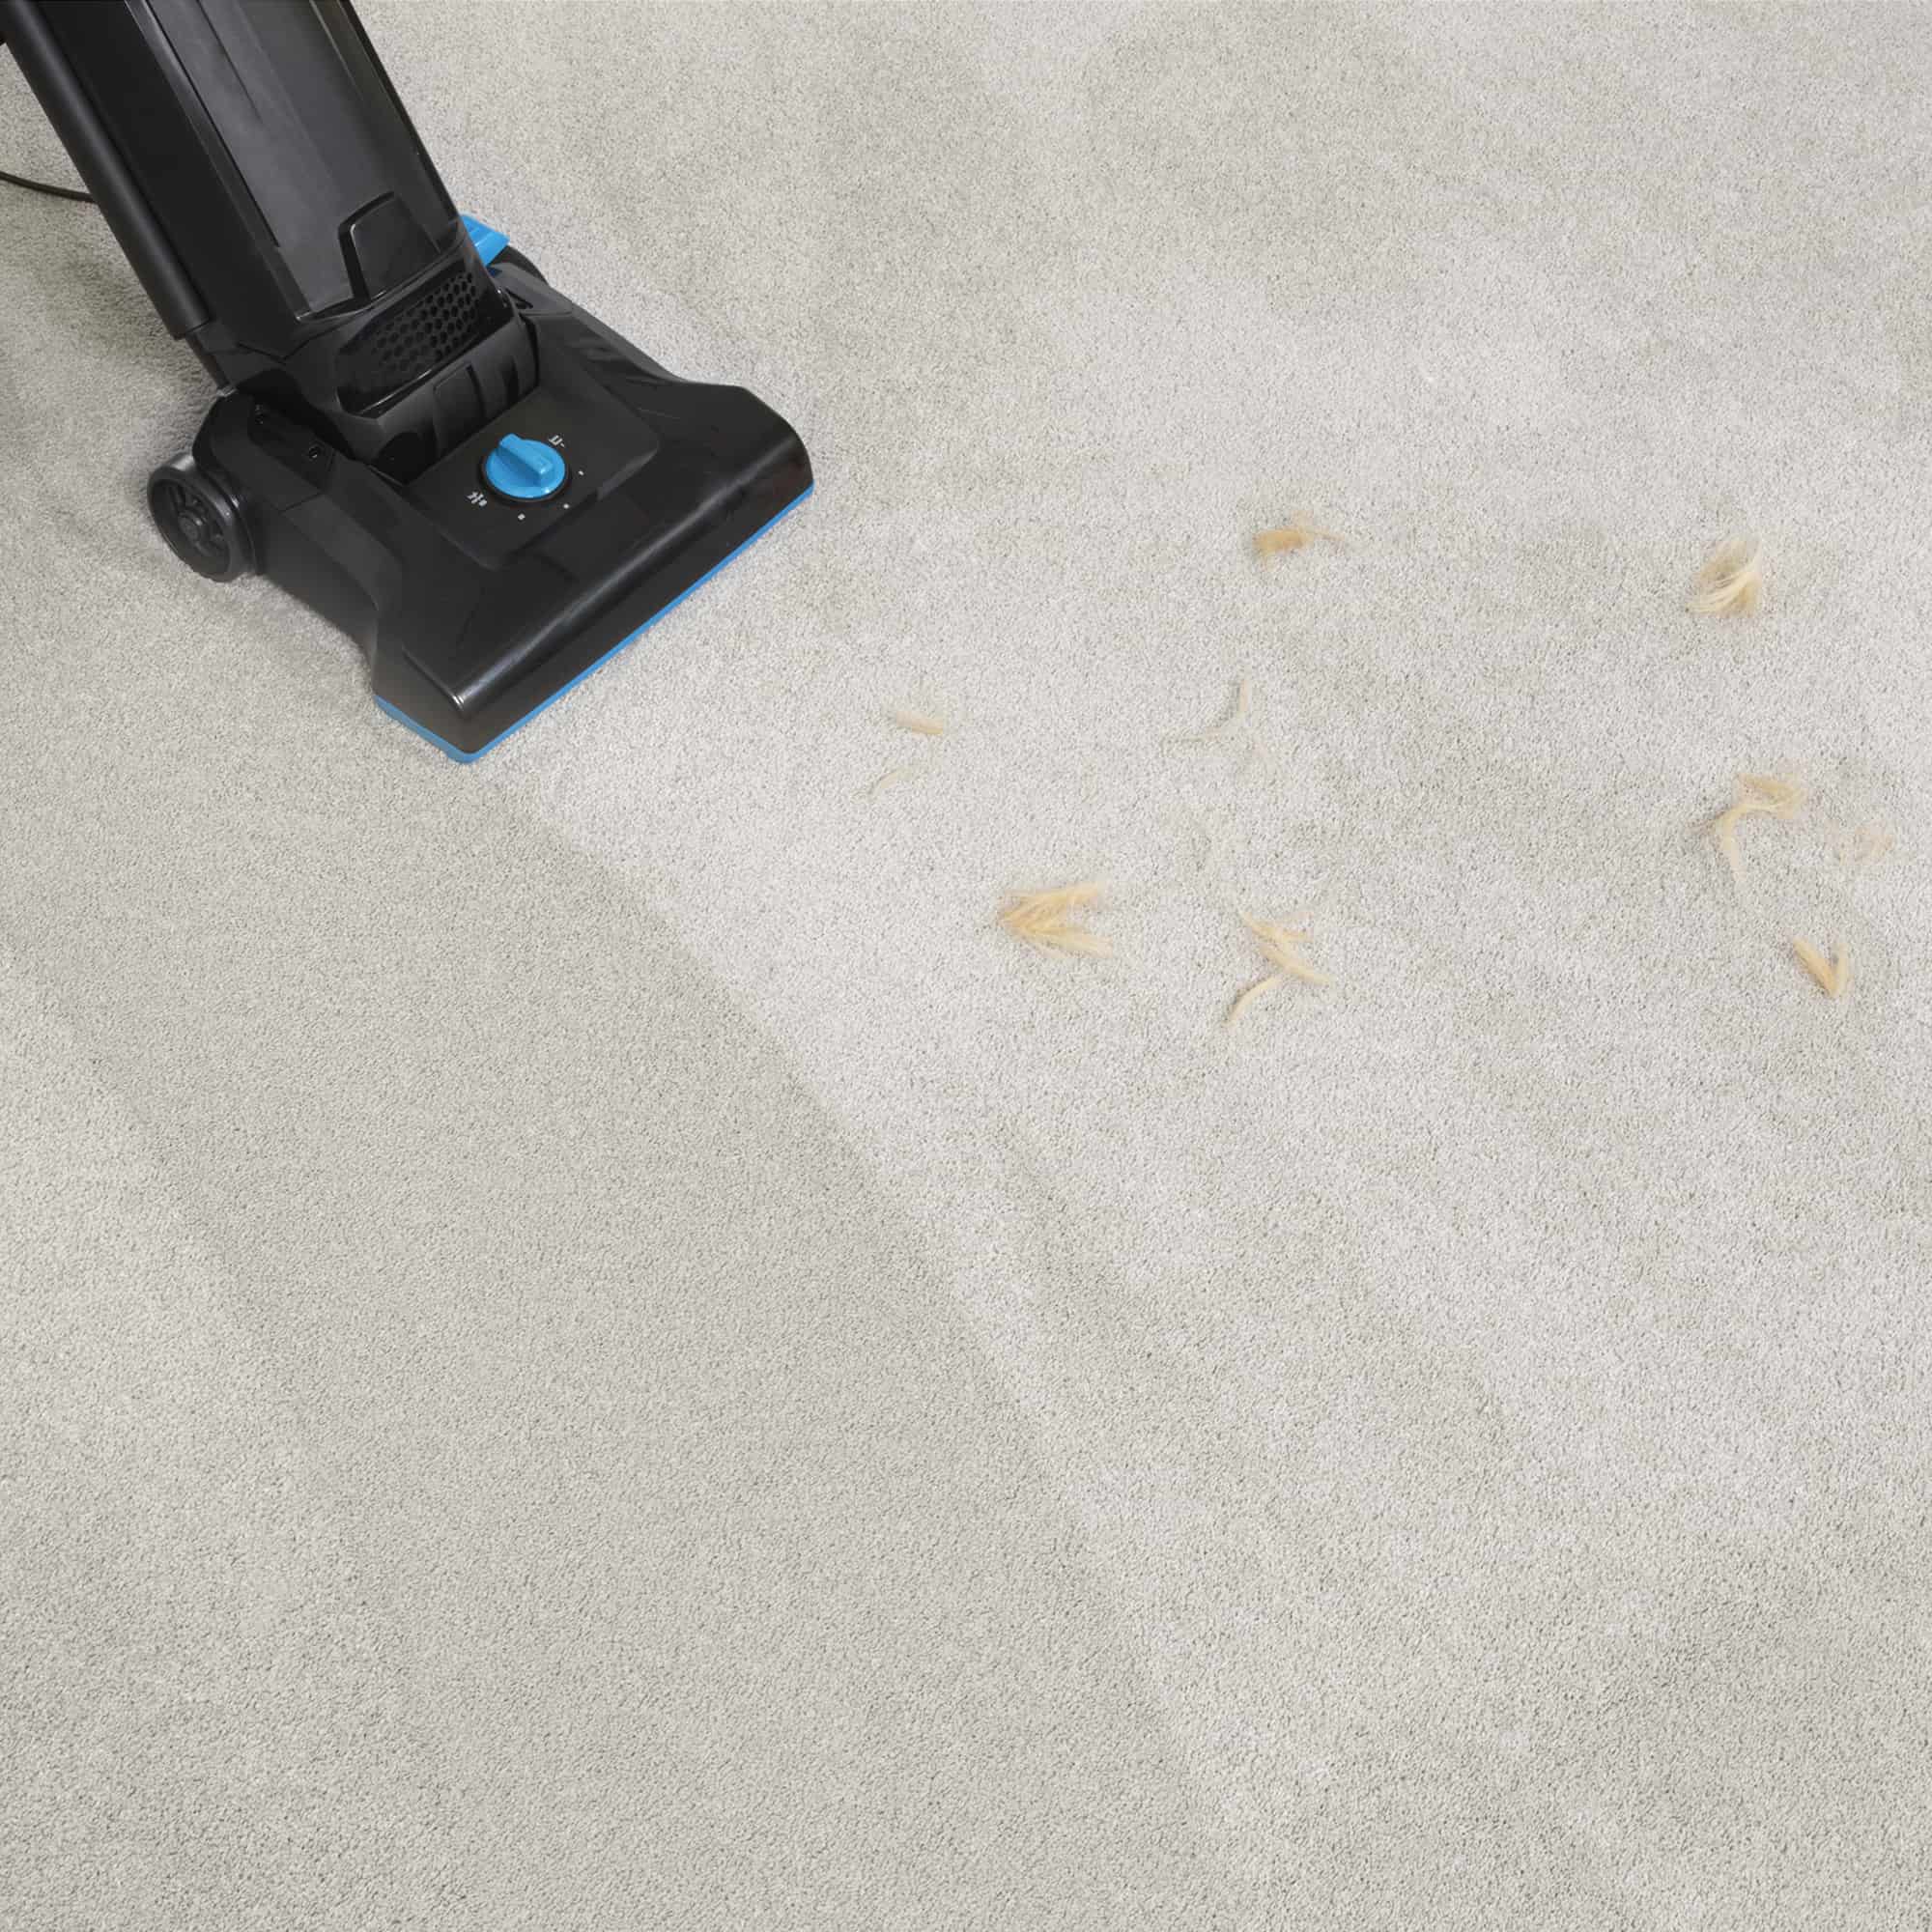 Upright vacuum cleaning up pet hair on white carpet.